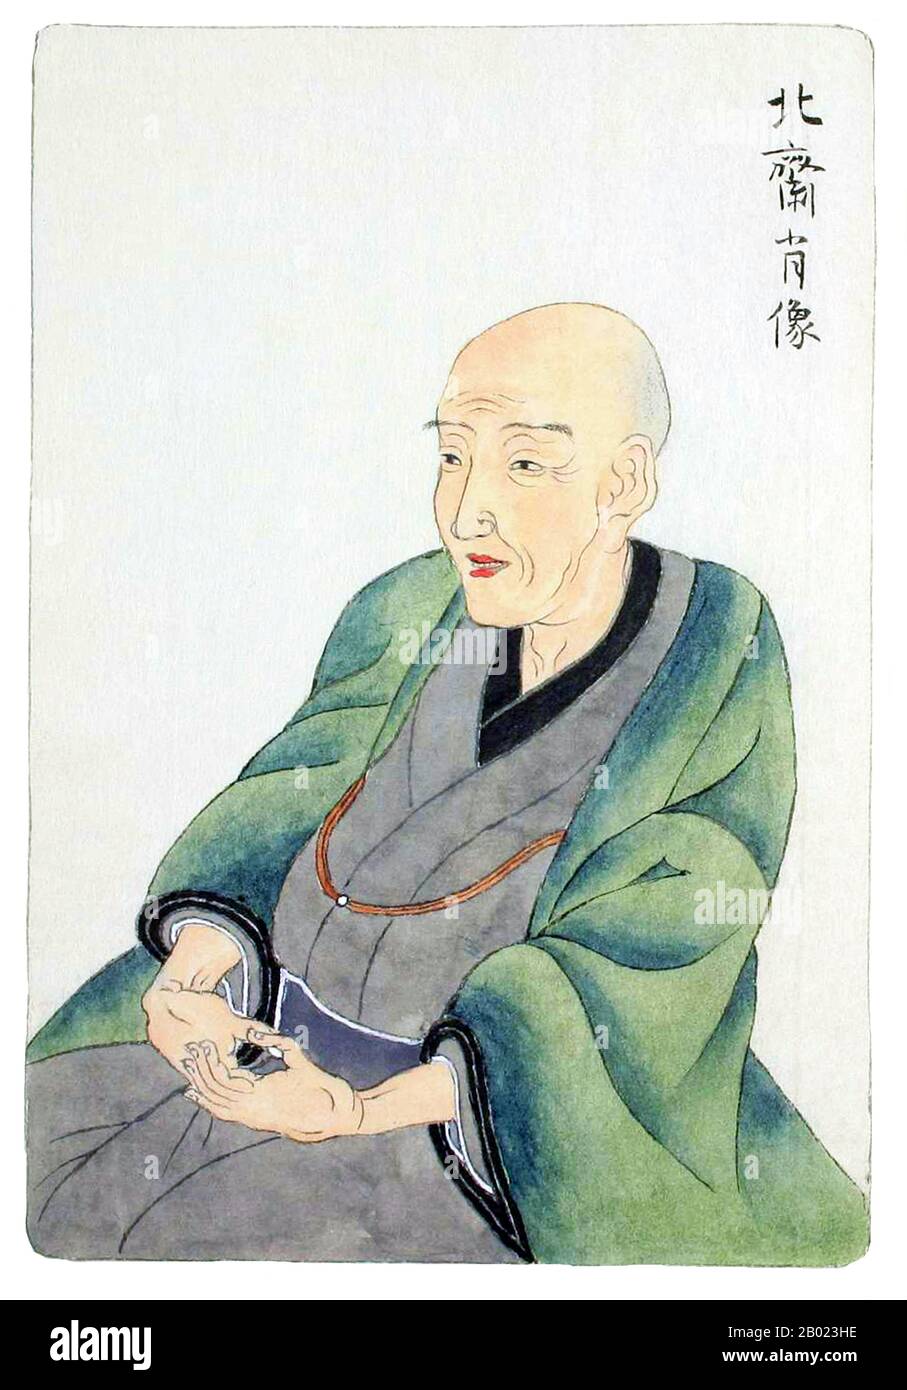 Katsushika Hokusai (葛飾 北斎, October 31, 1760 – May 10, 1849) was a Japanese artist, ukiyo-e painter and printmaker of the Edo period. He was influenced by such painters as Sesshu, and other styles of Chinese painting. Born in Edo (now Tokyo), Hokusai is best known as author of the woodblock print series Thirty-six Views of Mount Fuji (富嶽三十六景 Fugaku Sanjūroku-kei, c. 1831) which includes the internationally recognized print, The Great Wave off Kanagawa, created during the 1820s.  Hokusai created the 'Thirty-Six Views' both as a response to a domestic travel boom and as part of a personal obsessi Stock Photo